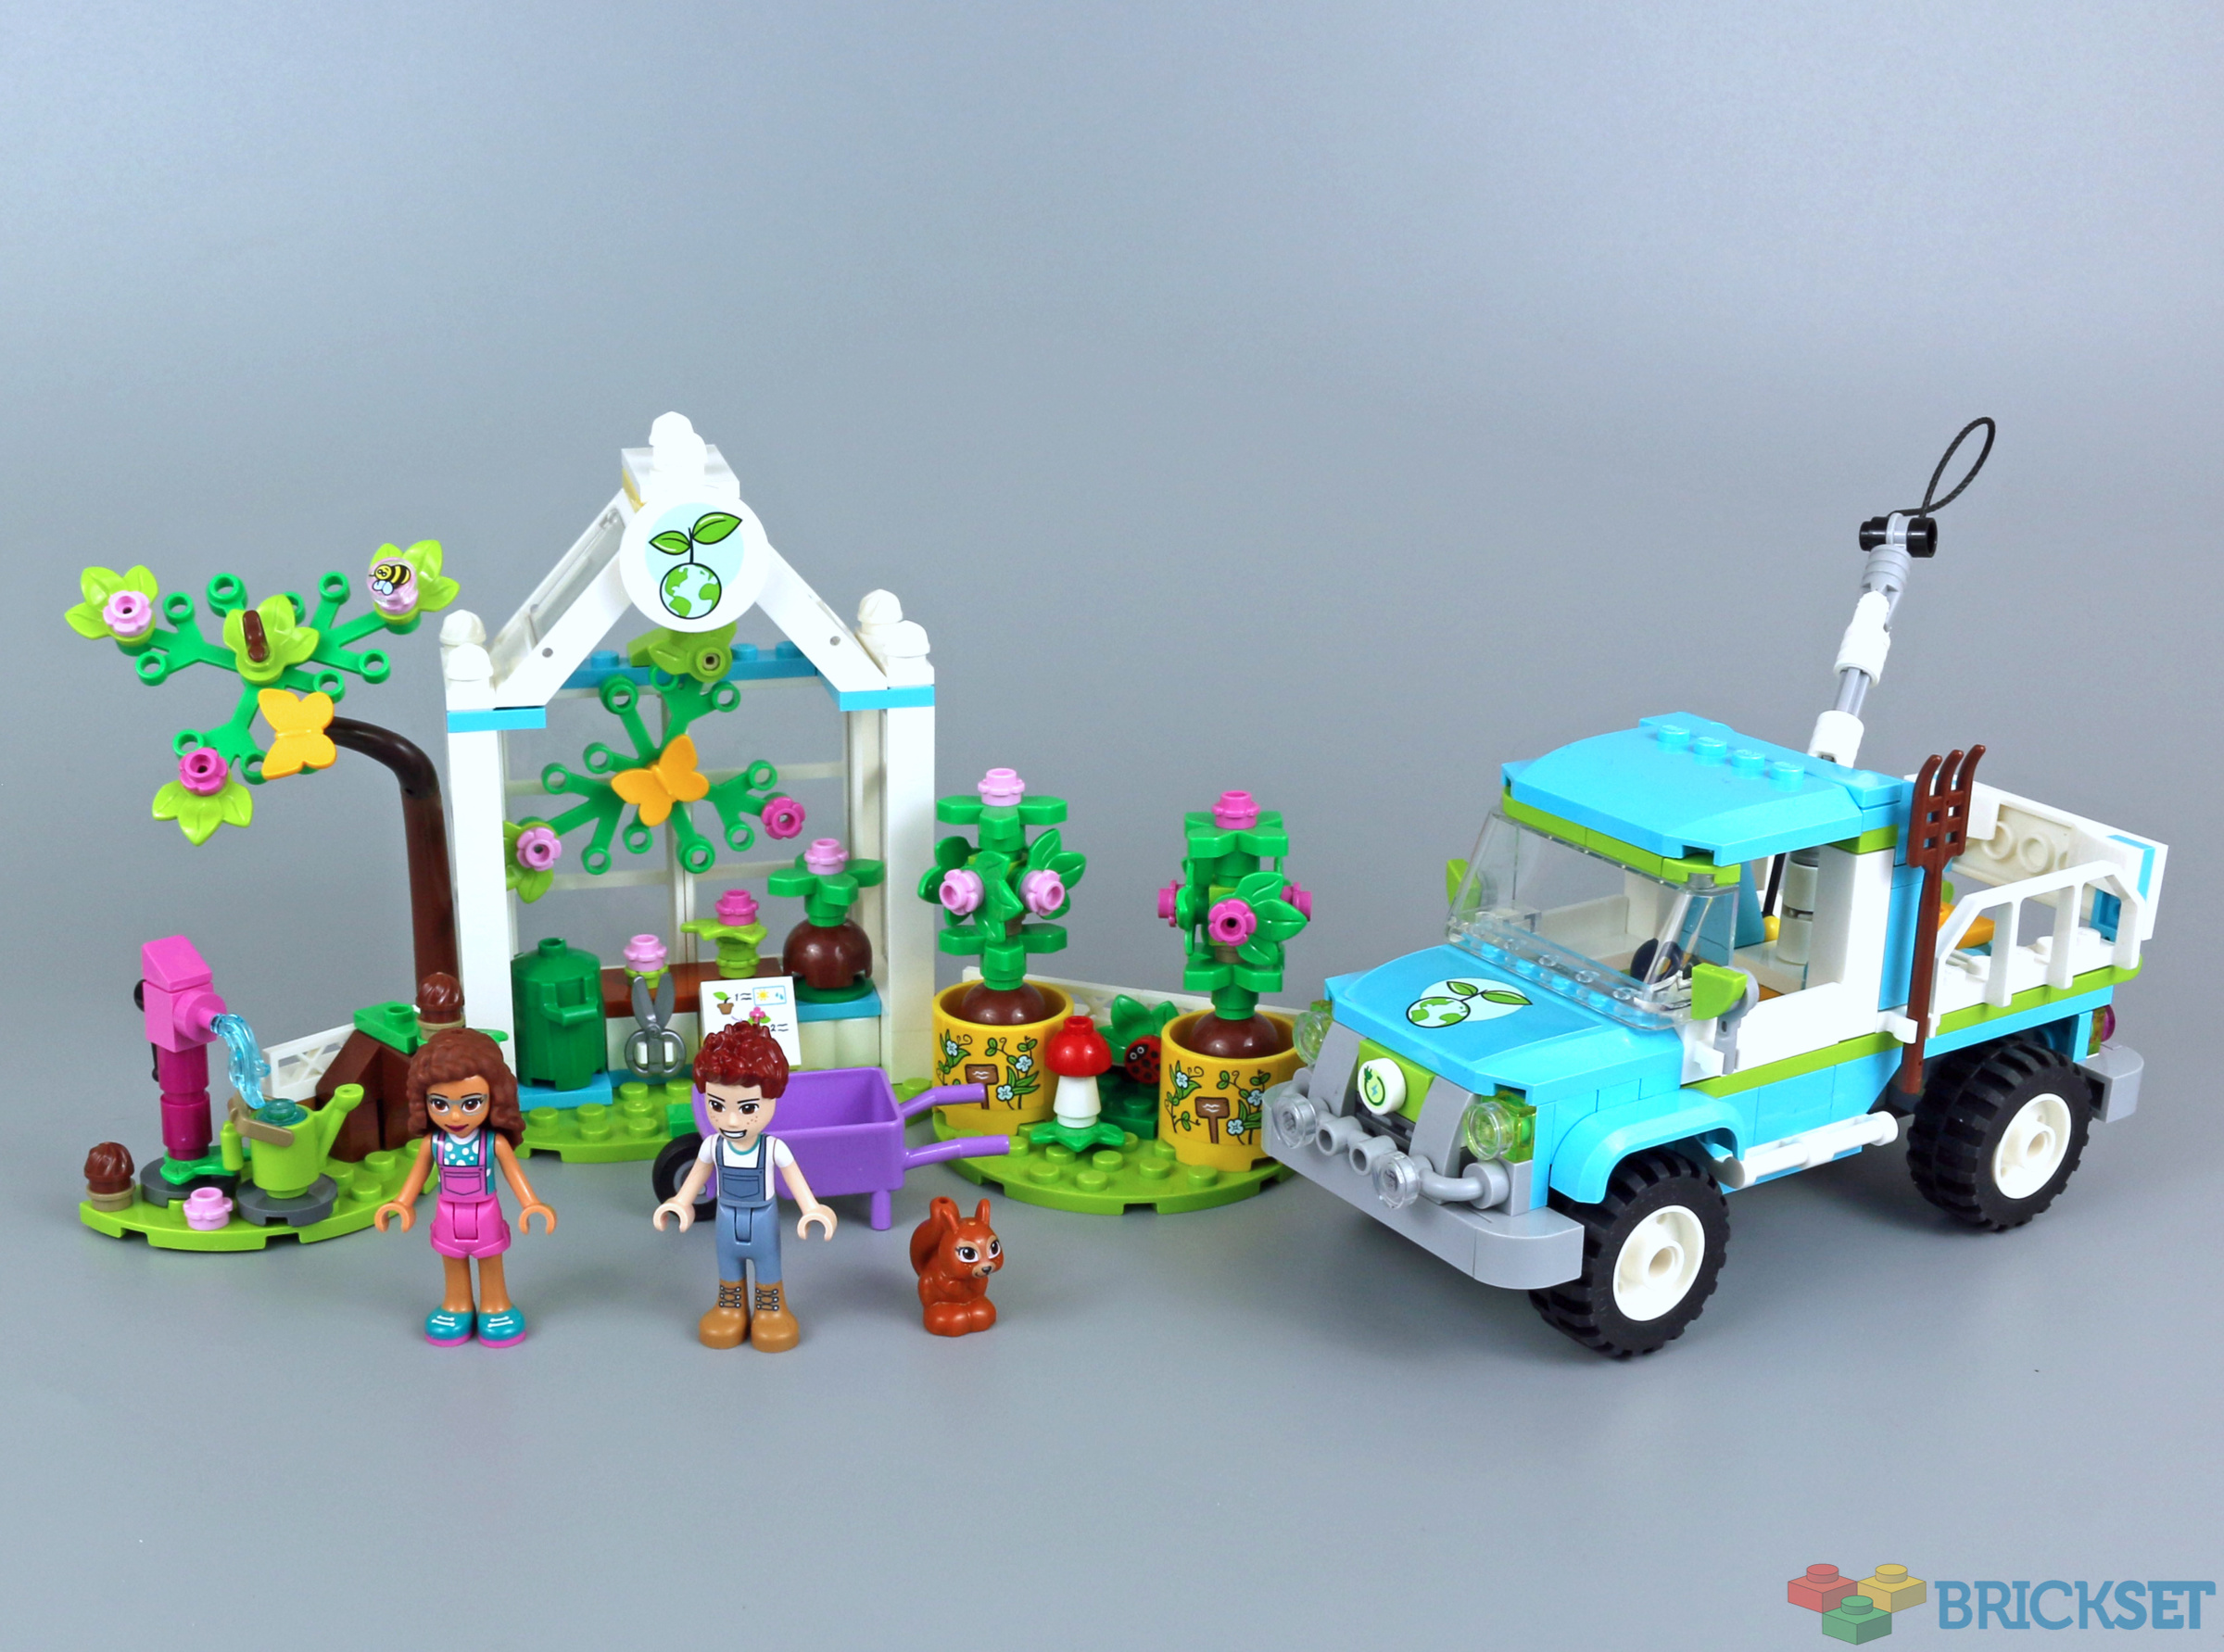 LEGO 41707 Tree Planting Vehicle review